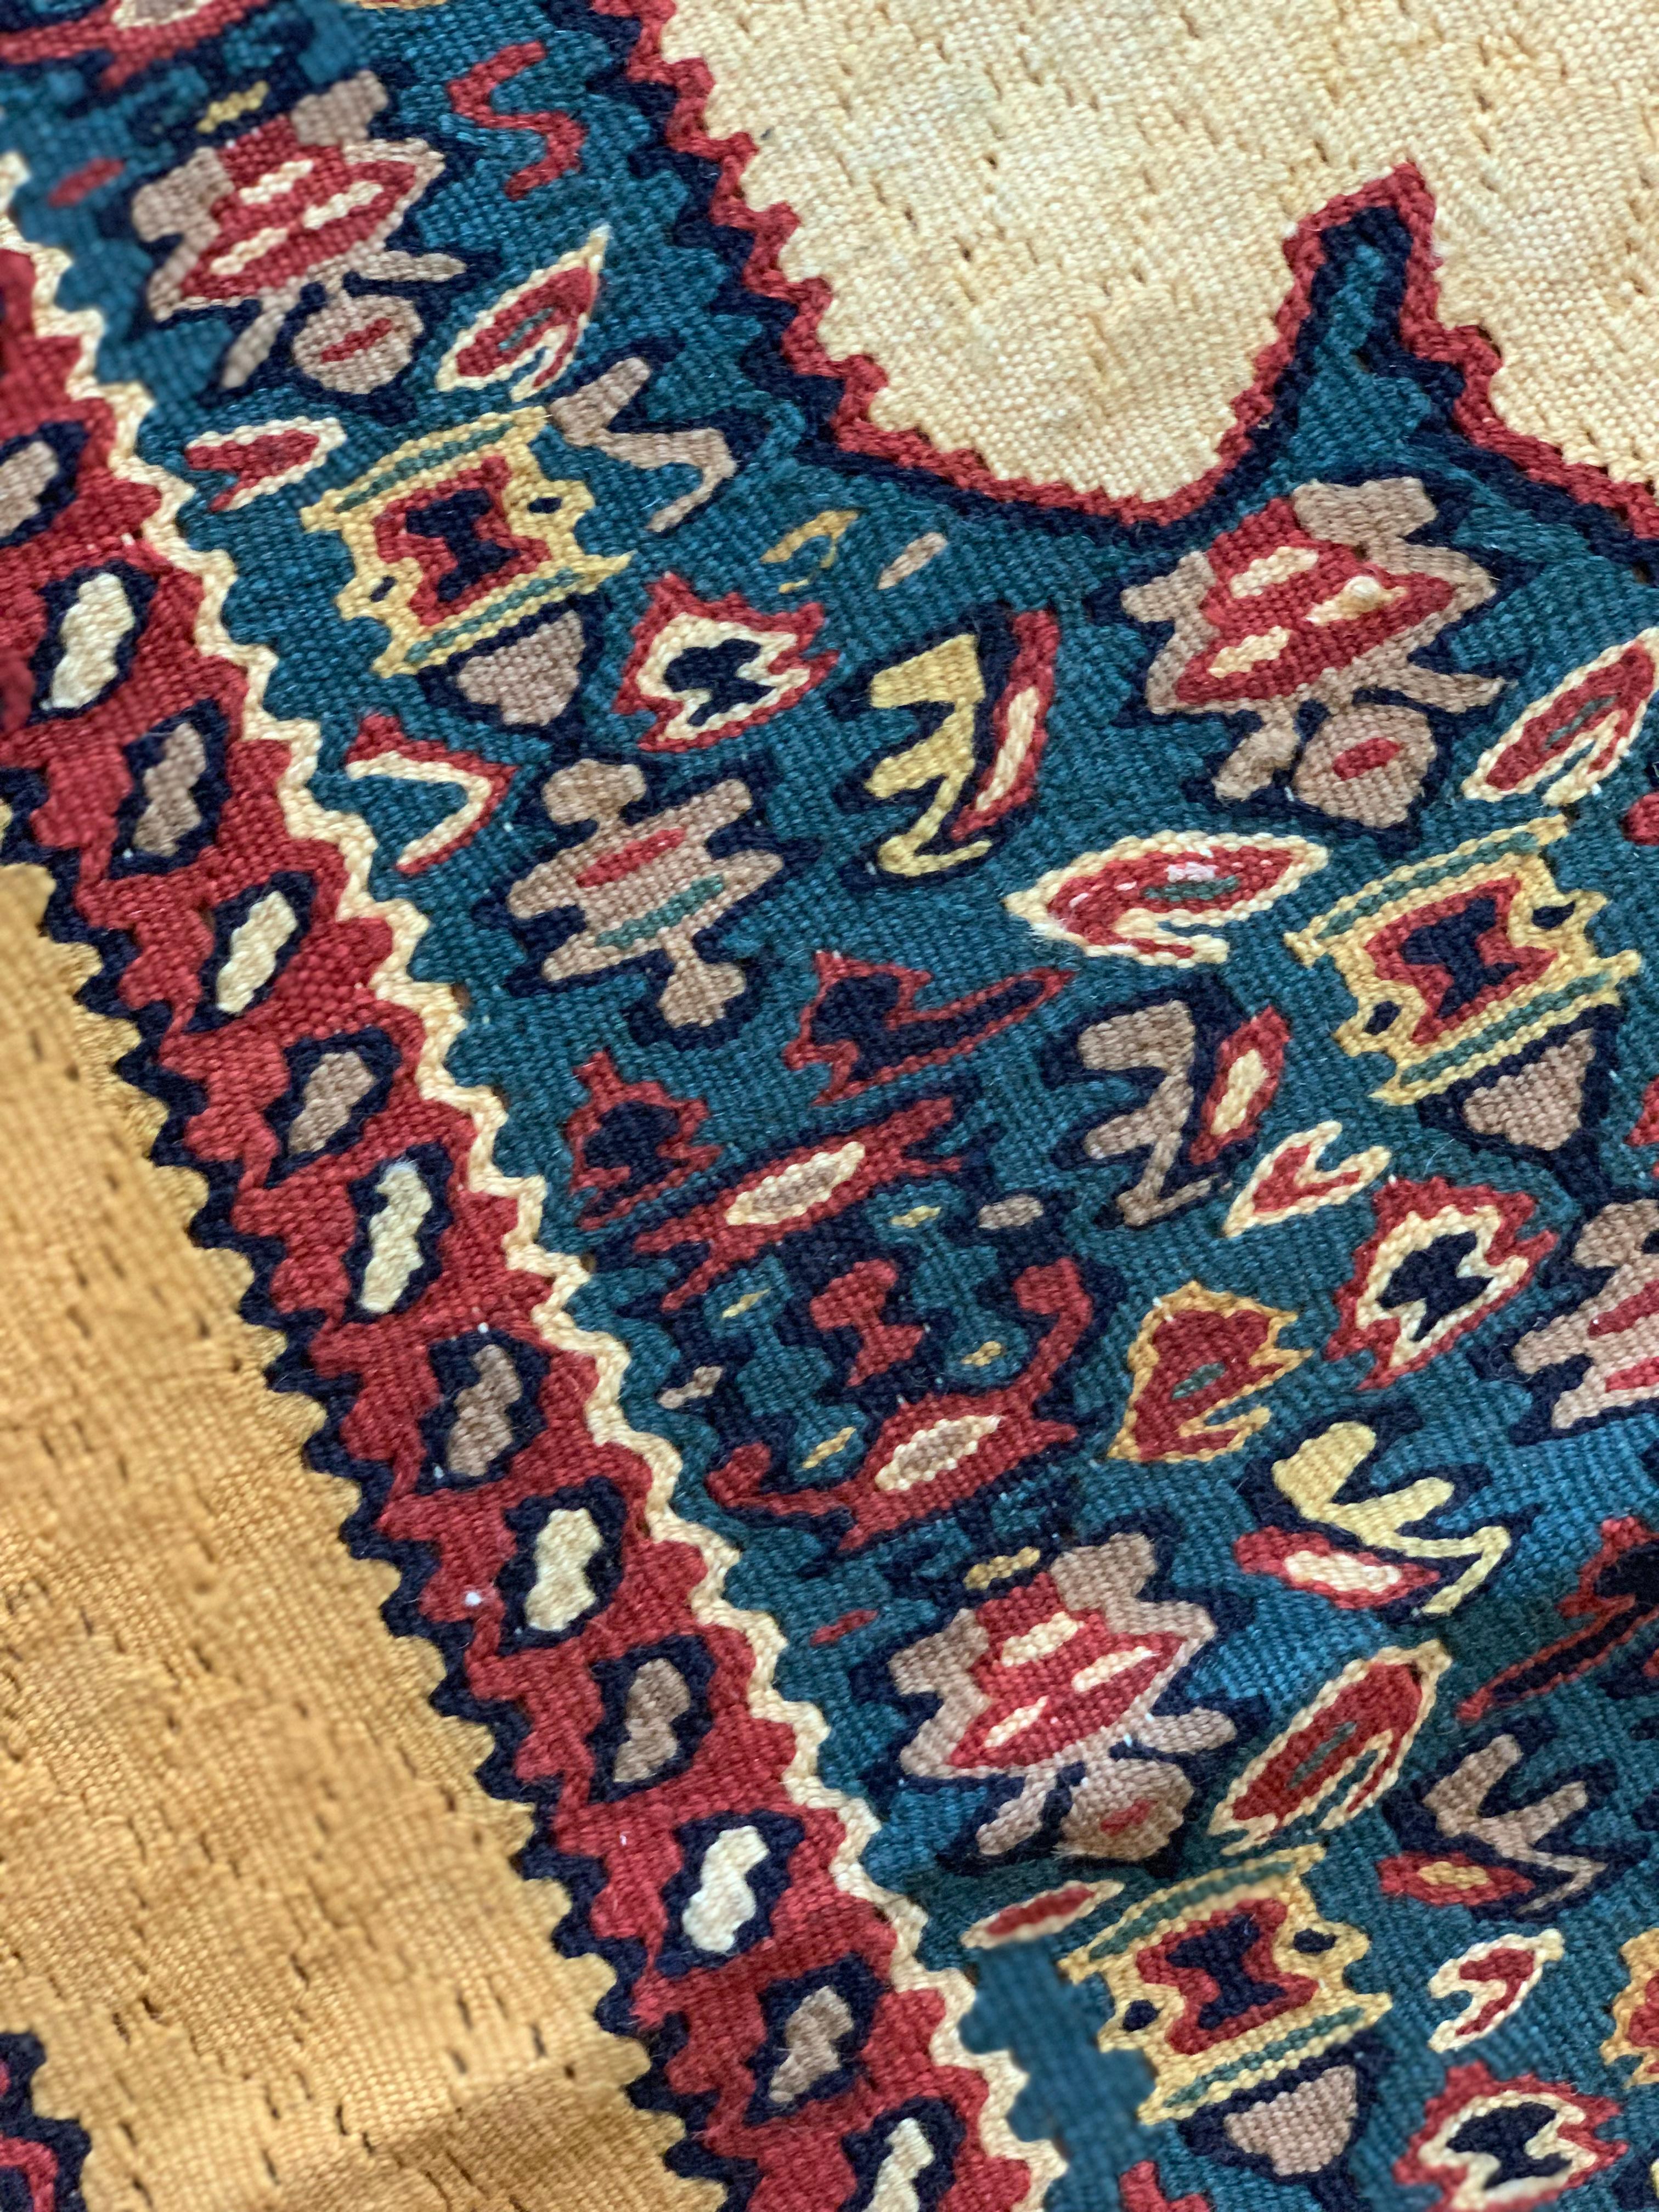 This beautiful wool carpet is a handmade, flatwoven kilim woven in the early 21st century, circa 2010. It is unused and so is in excellent condition. The design features a bold medallion design woven on an ivory background with blue, brown and cream